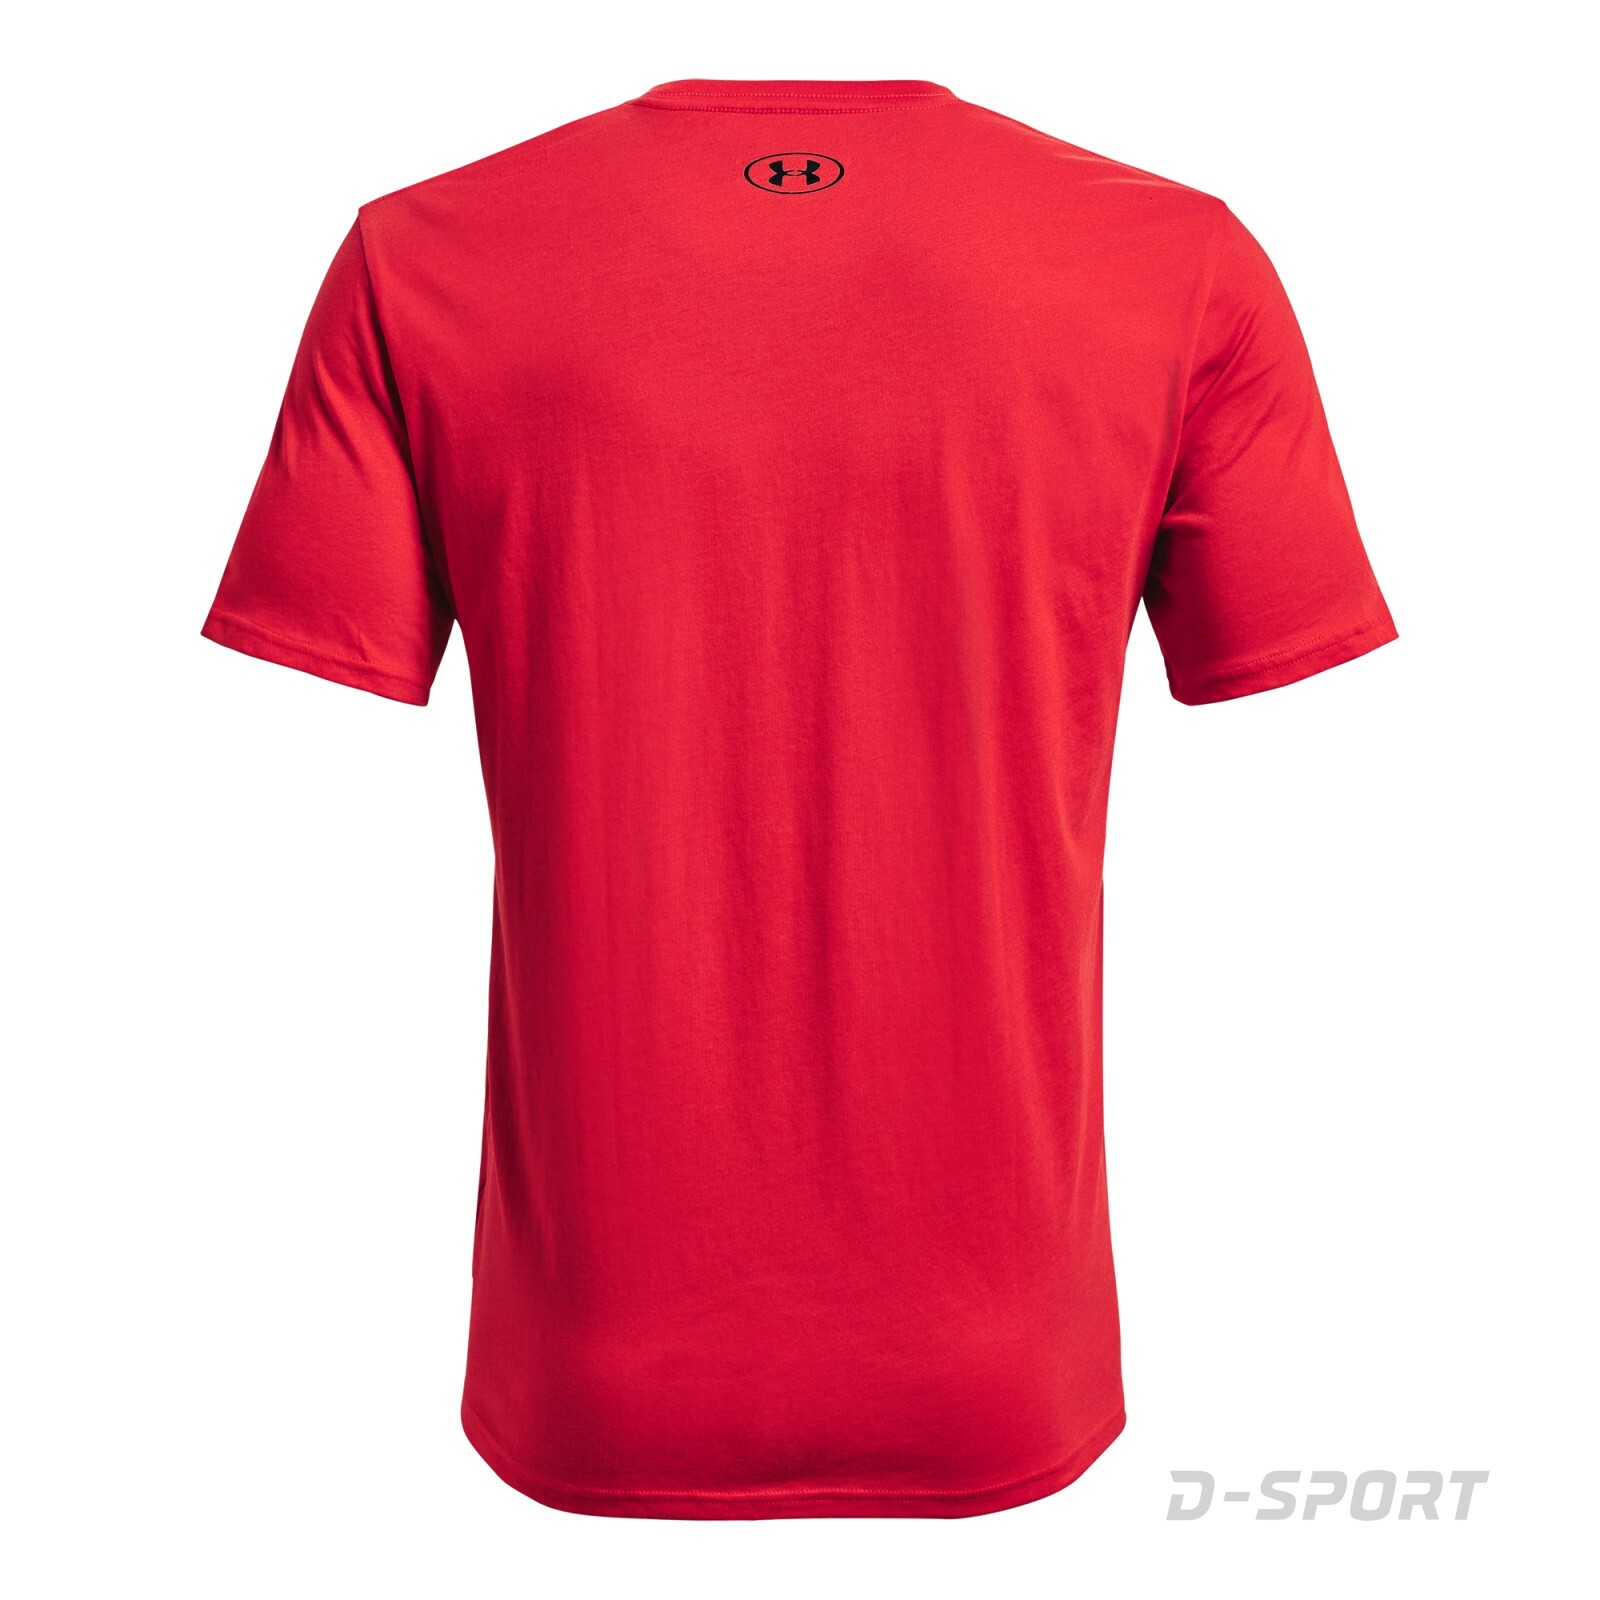 UNDER ARMOUR SPORTSTYLE LOGO SS